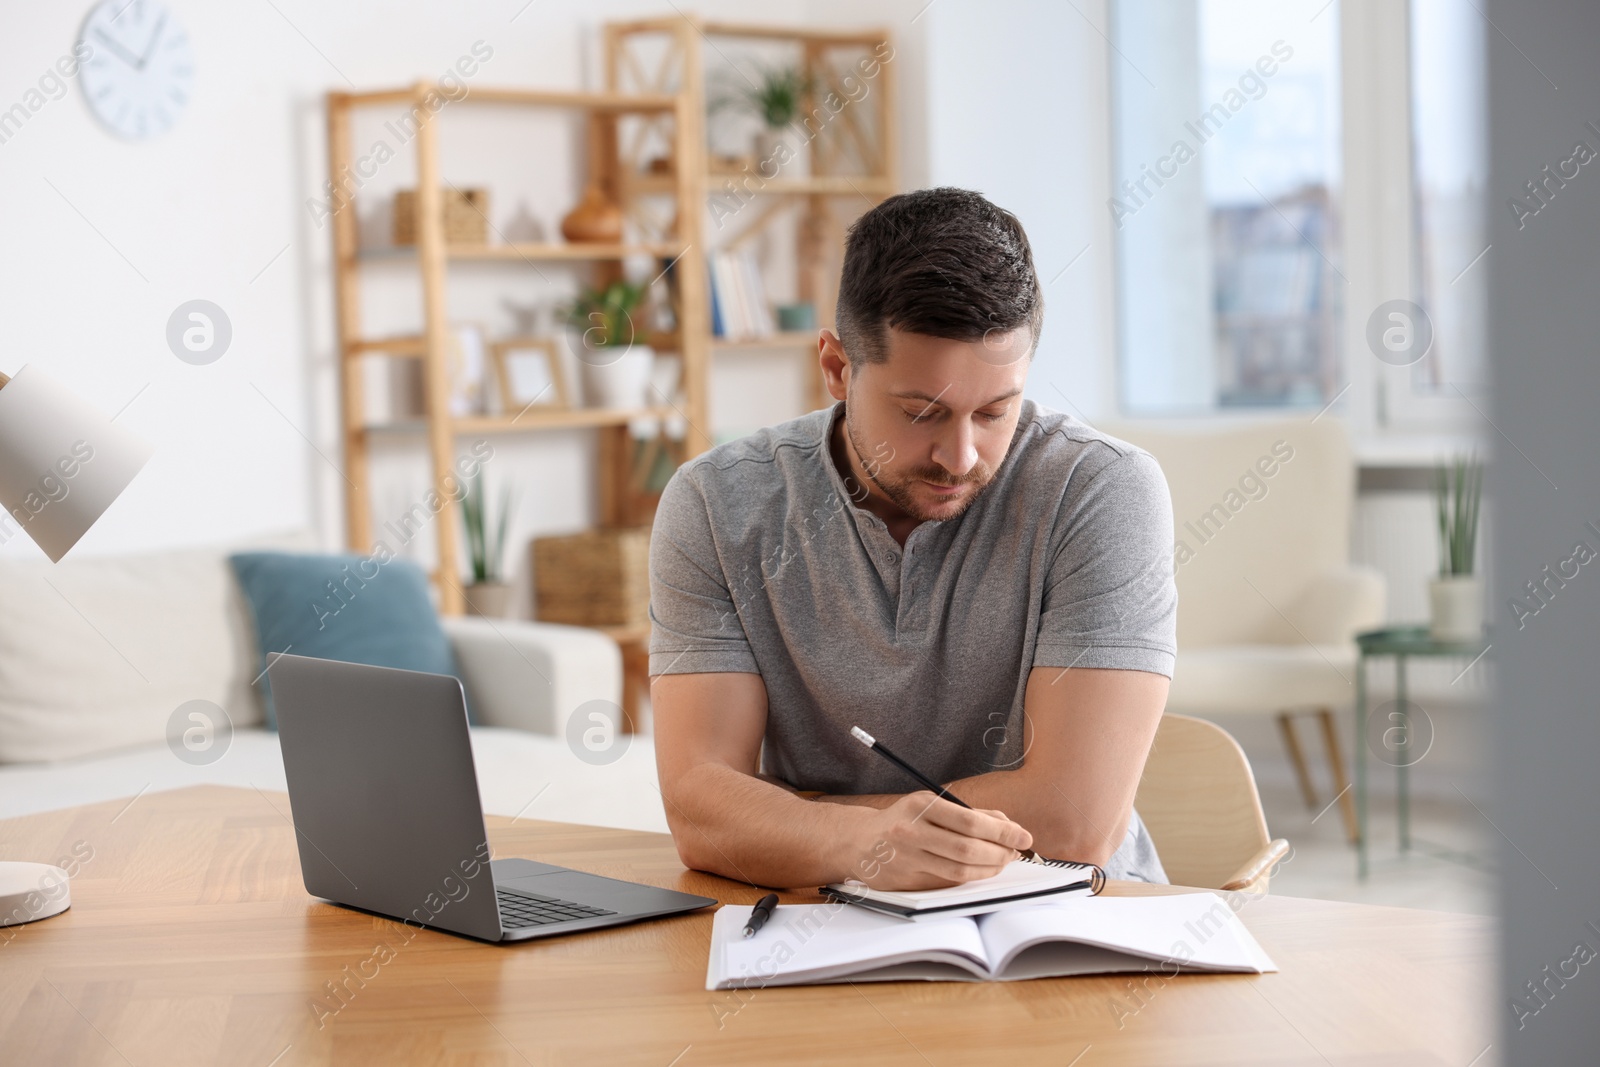 Photo of Man writing notes while working on laptop at wooden desk in room